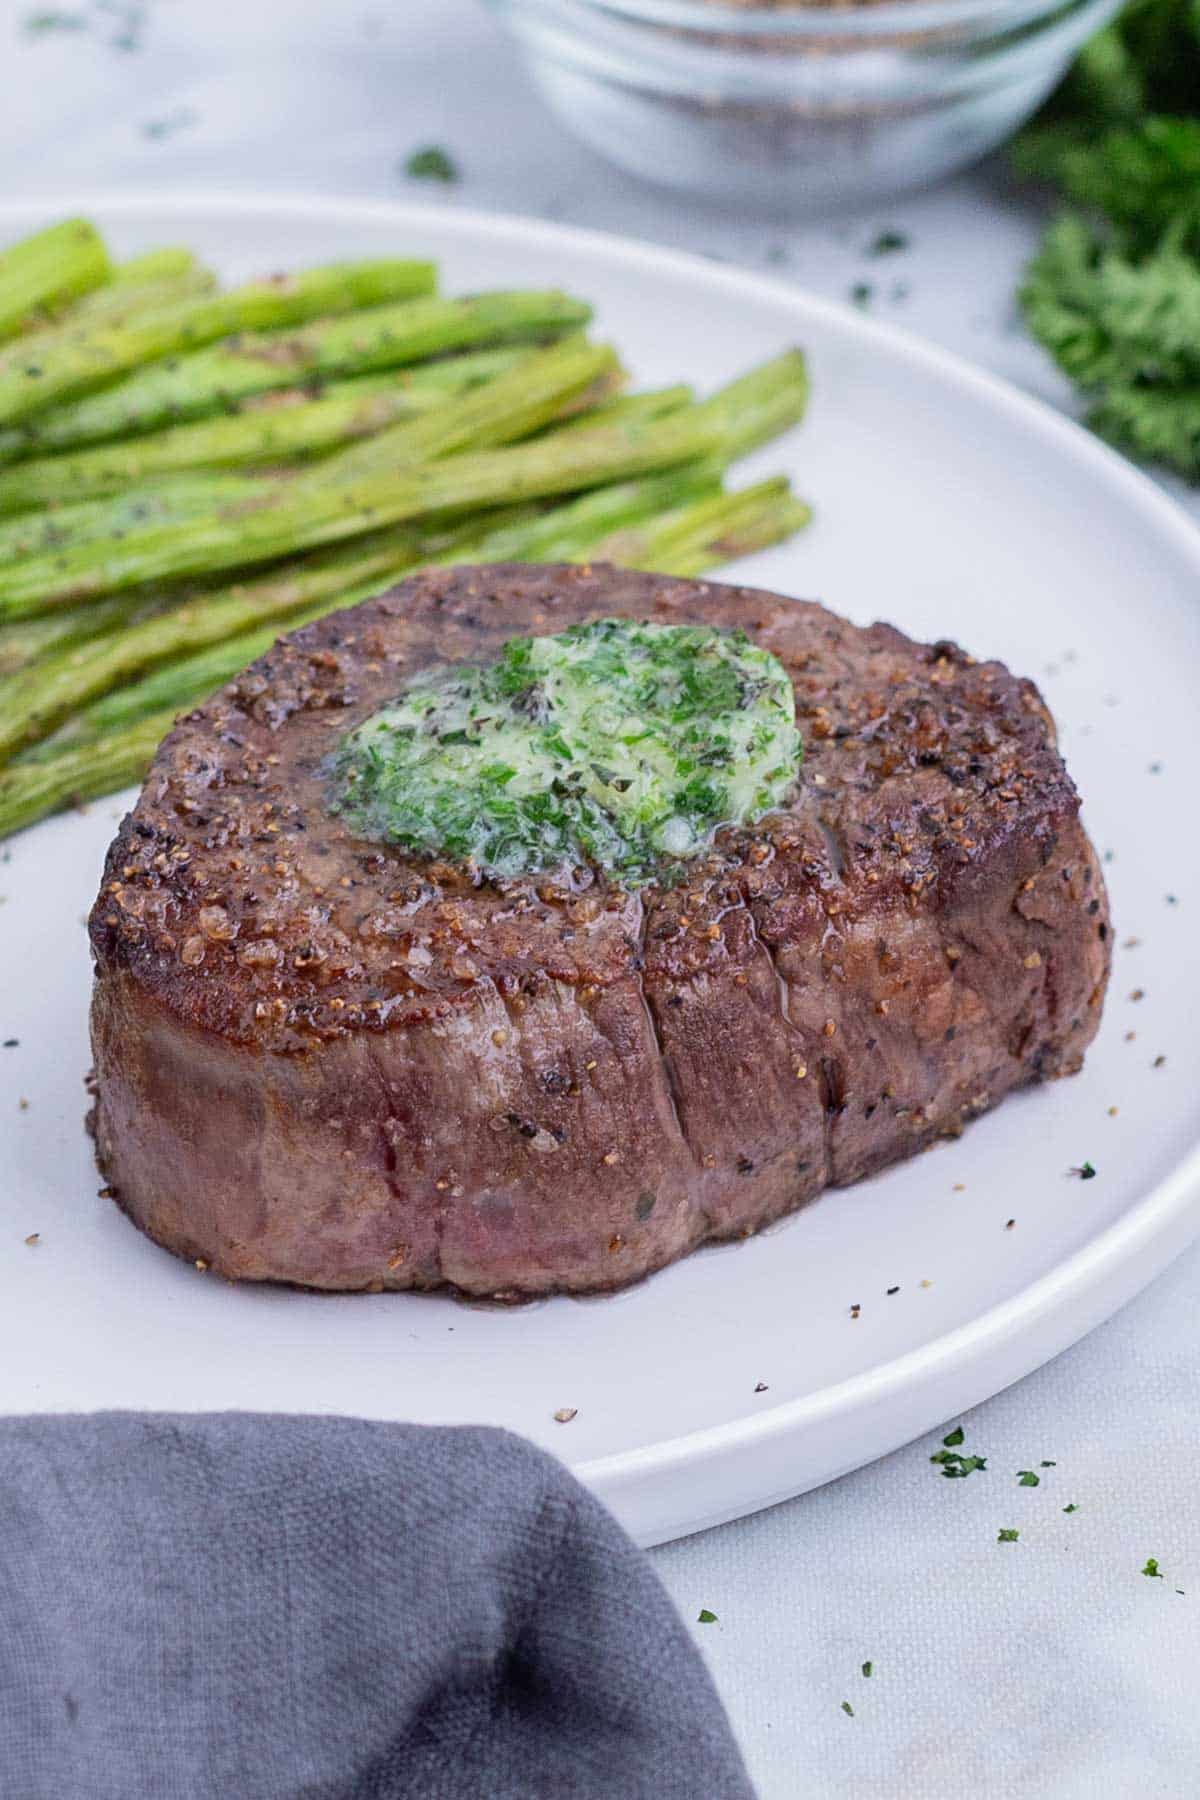 Filet mignon on a white plate with asparagus and herbed butter.